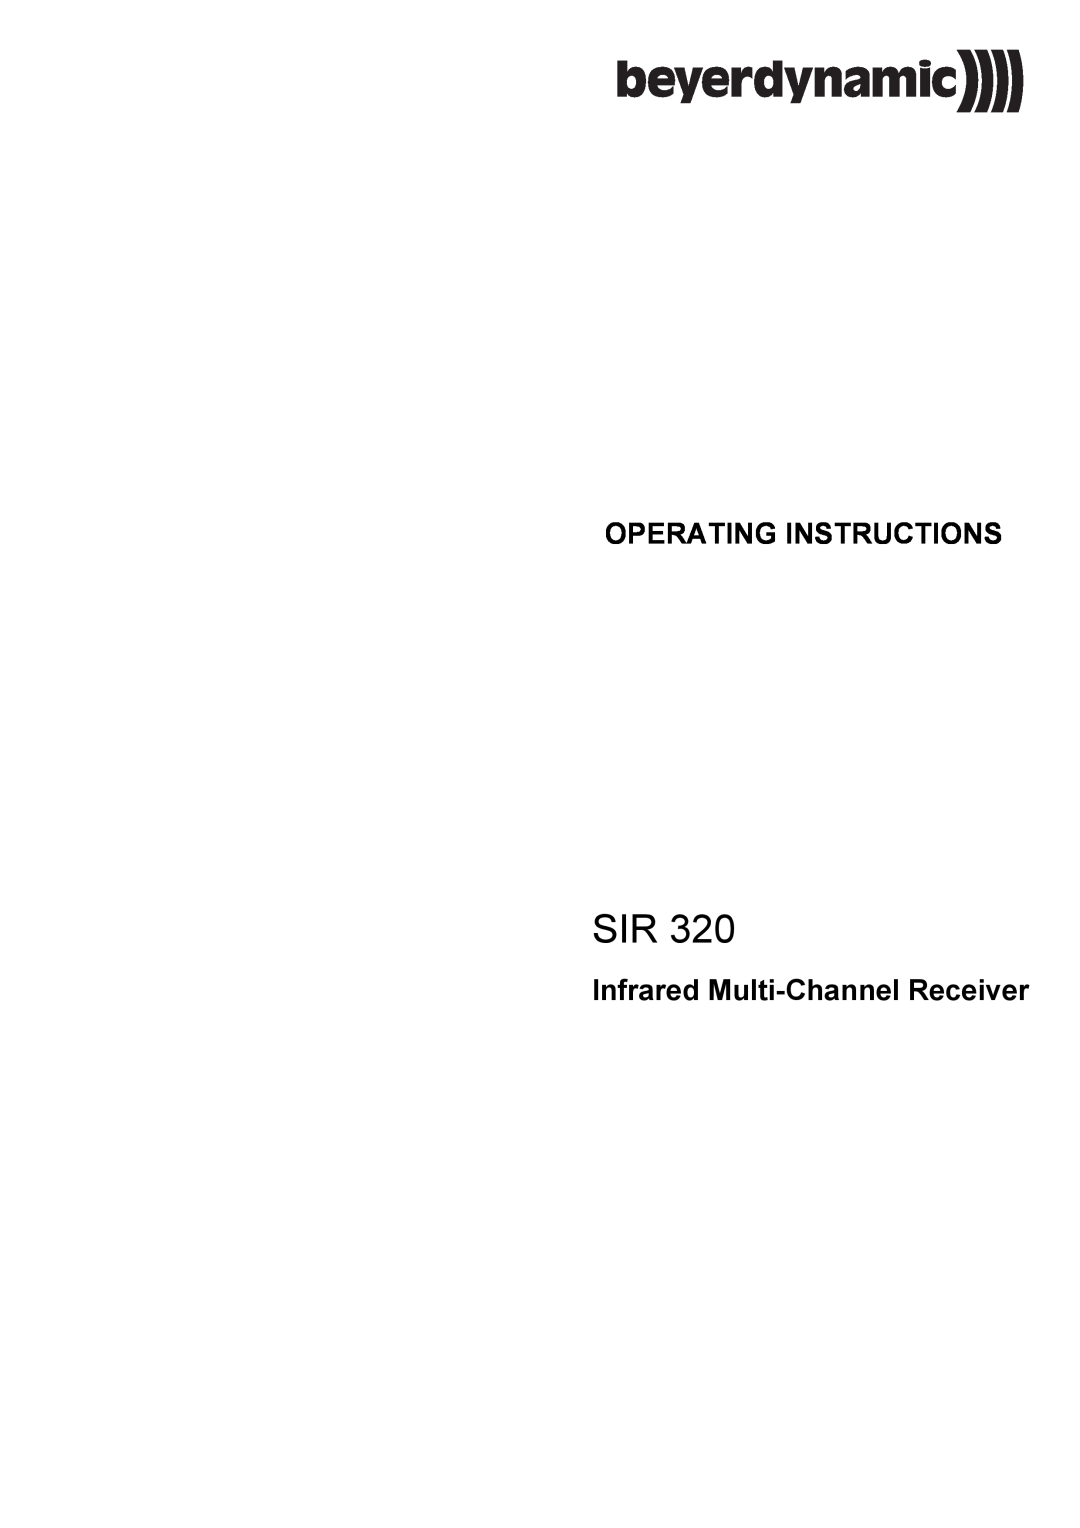 Beyerdynamic SIR 320 operating instructions Operating Instructions, Infrared Multi-ChannelReceiver 